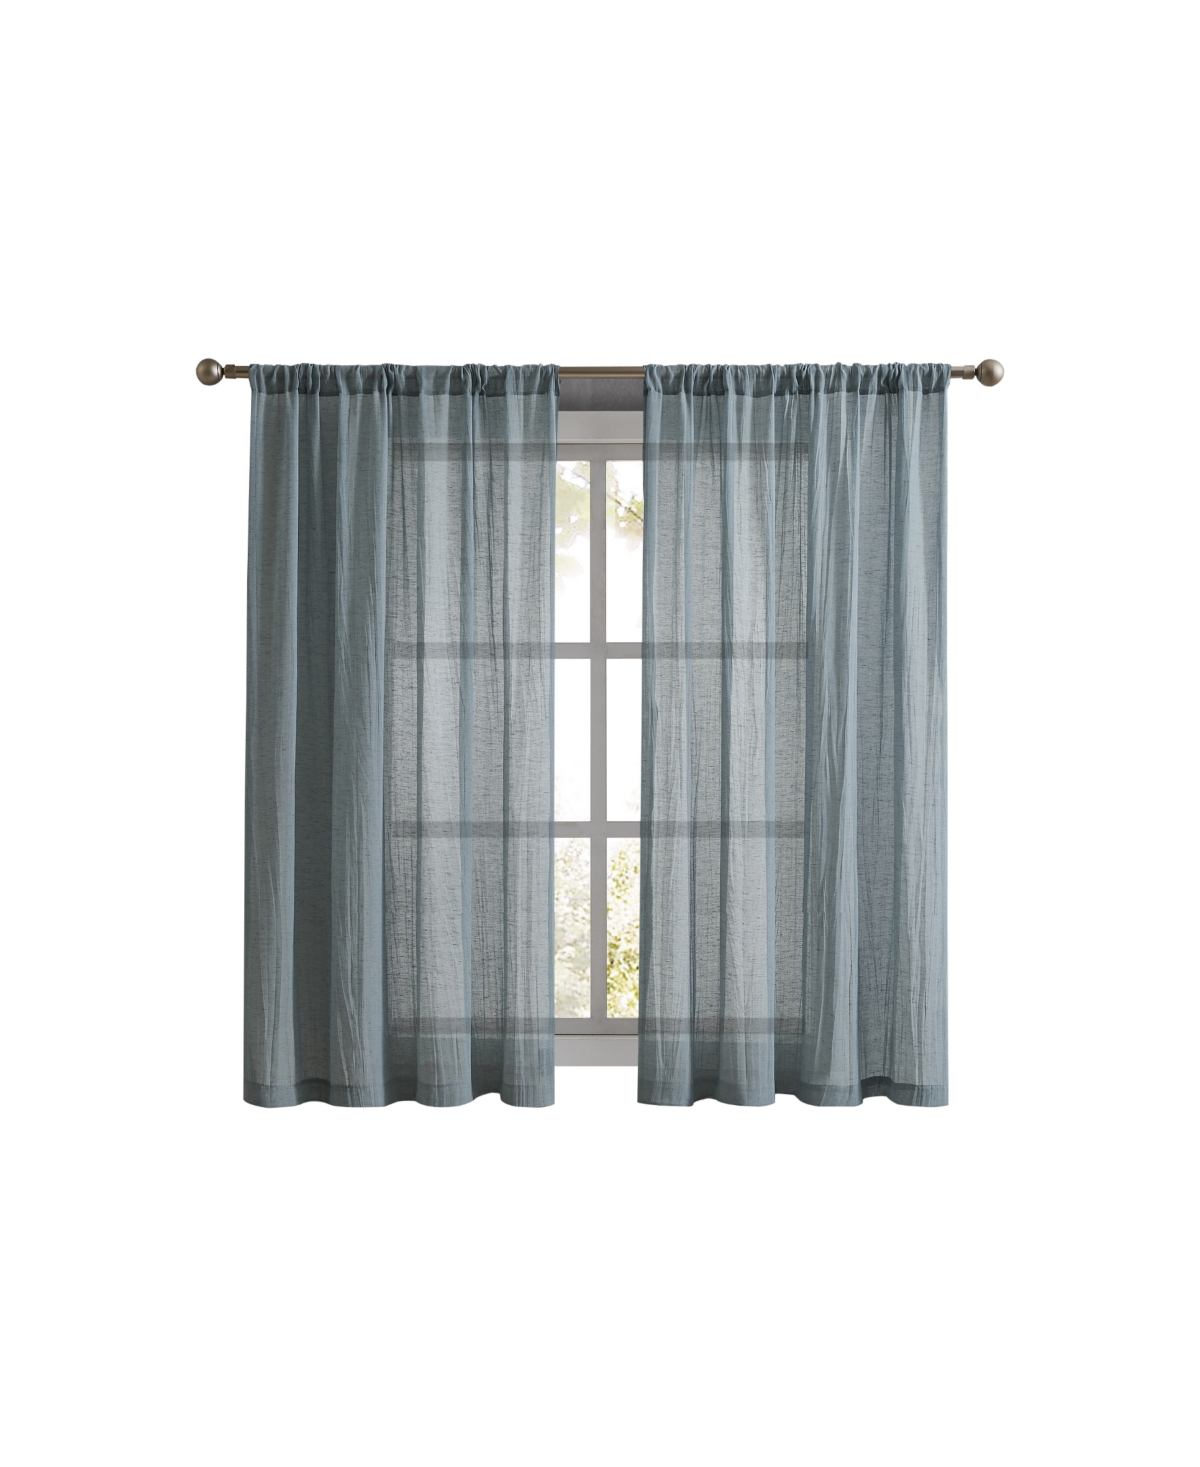 French Connection Charter Crushed Semi-sheer Rod Pocket Window Panel Pair, 63" X 50" In Aqua